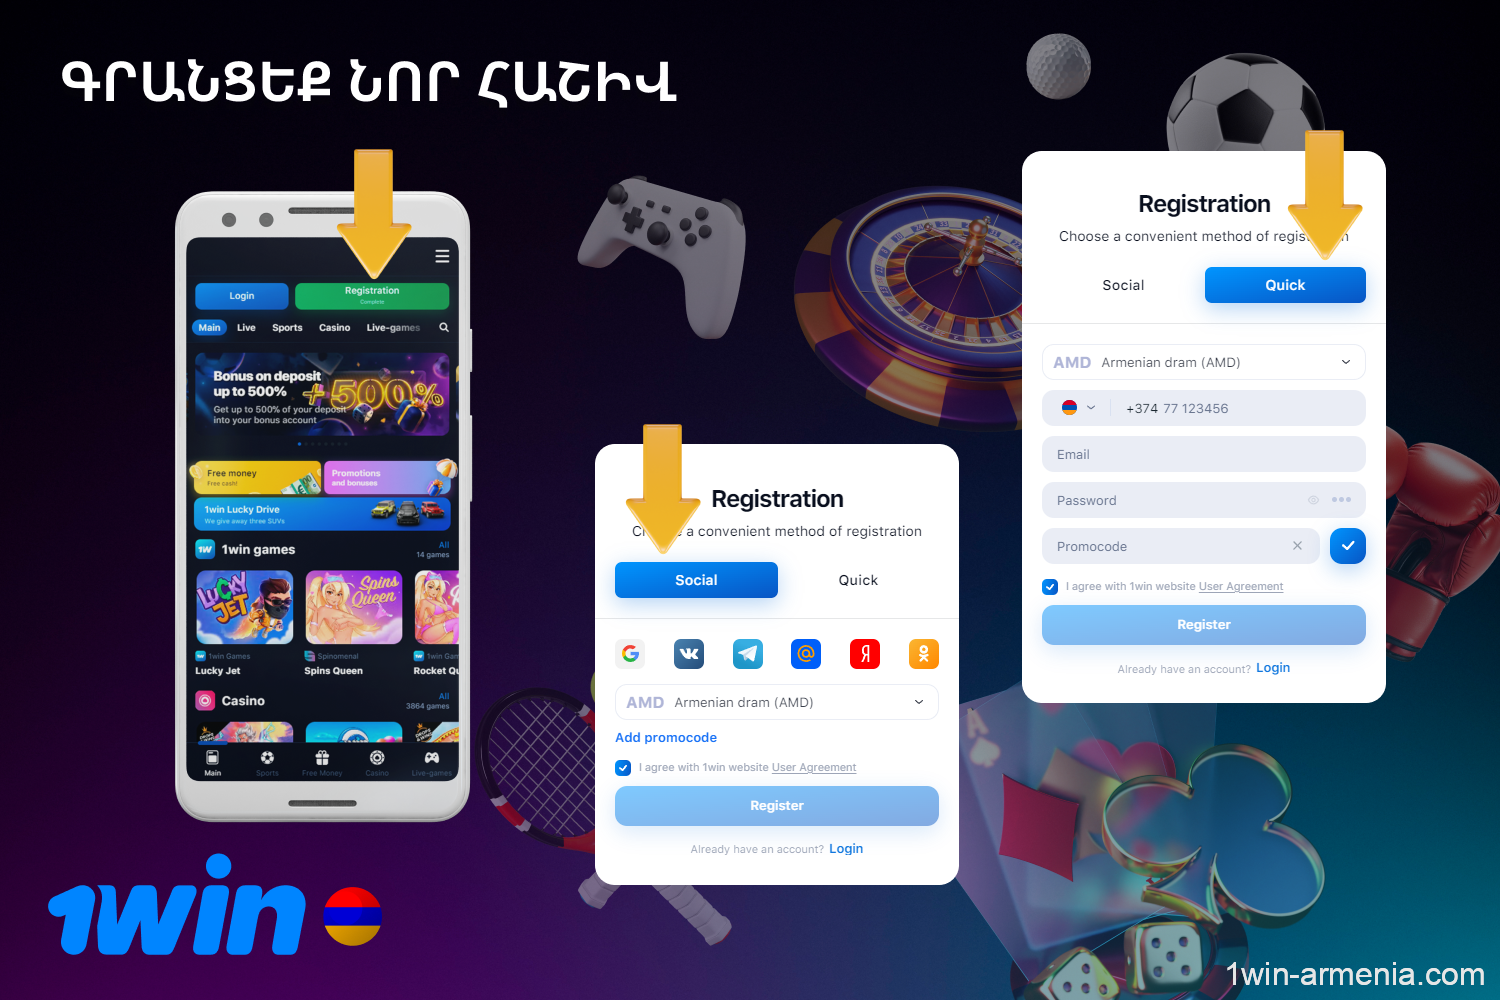 Users from Armenia can create an account on 1win using one of the available registration methods